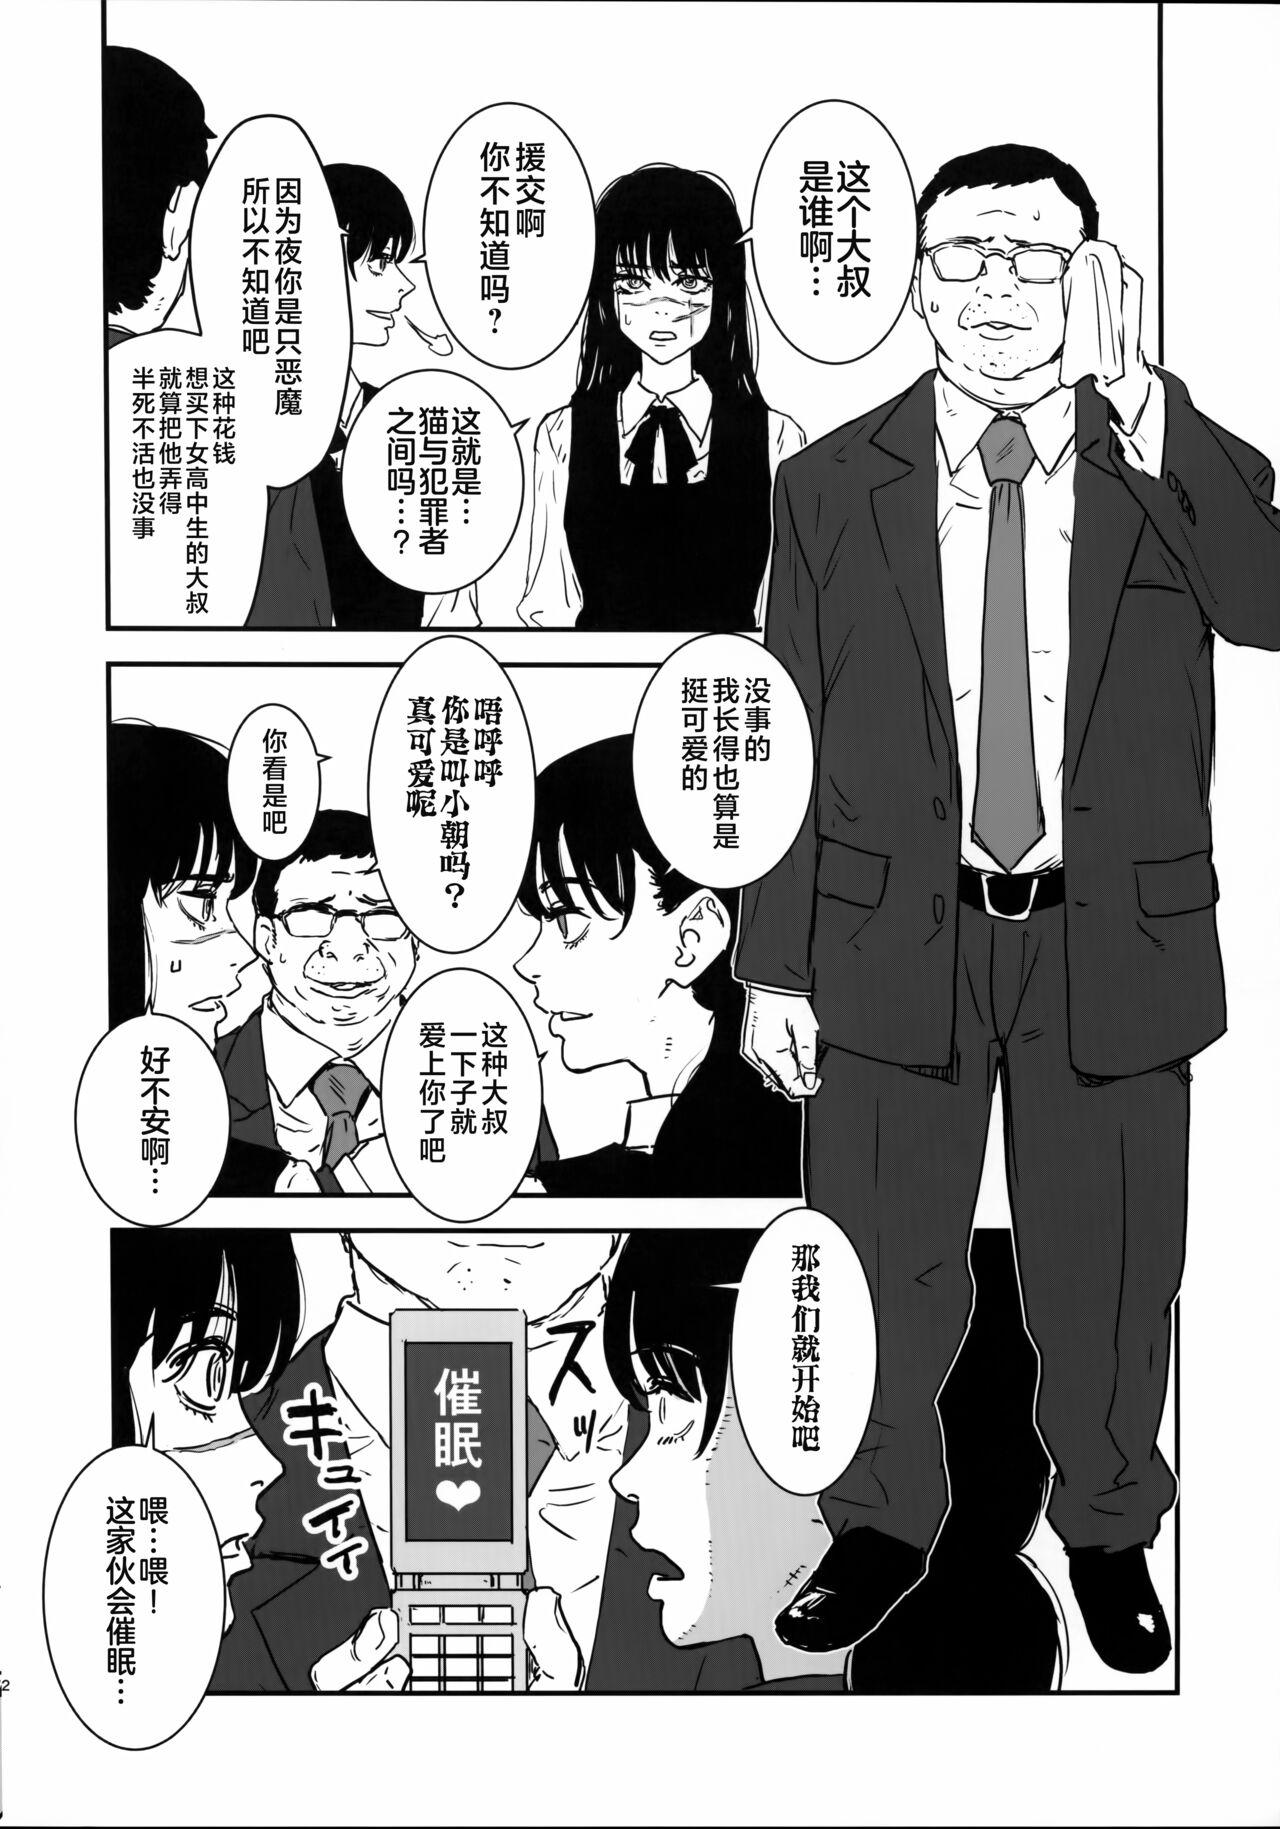 Anus 猫と犯罪者の間 - Chainsaw man Swallowing - Page 2